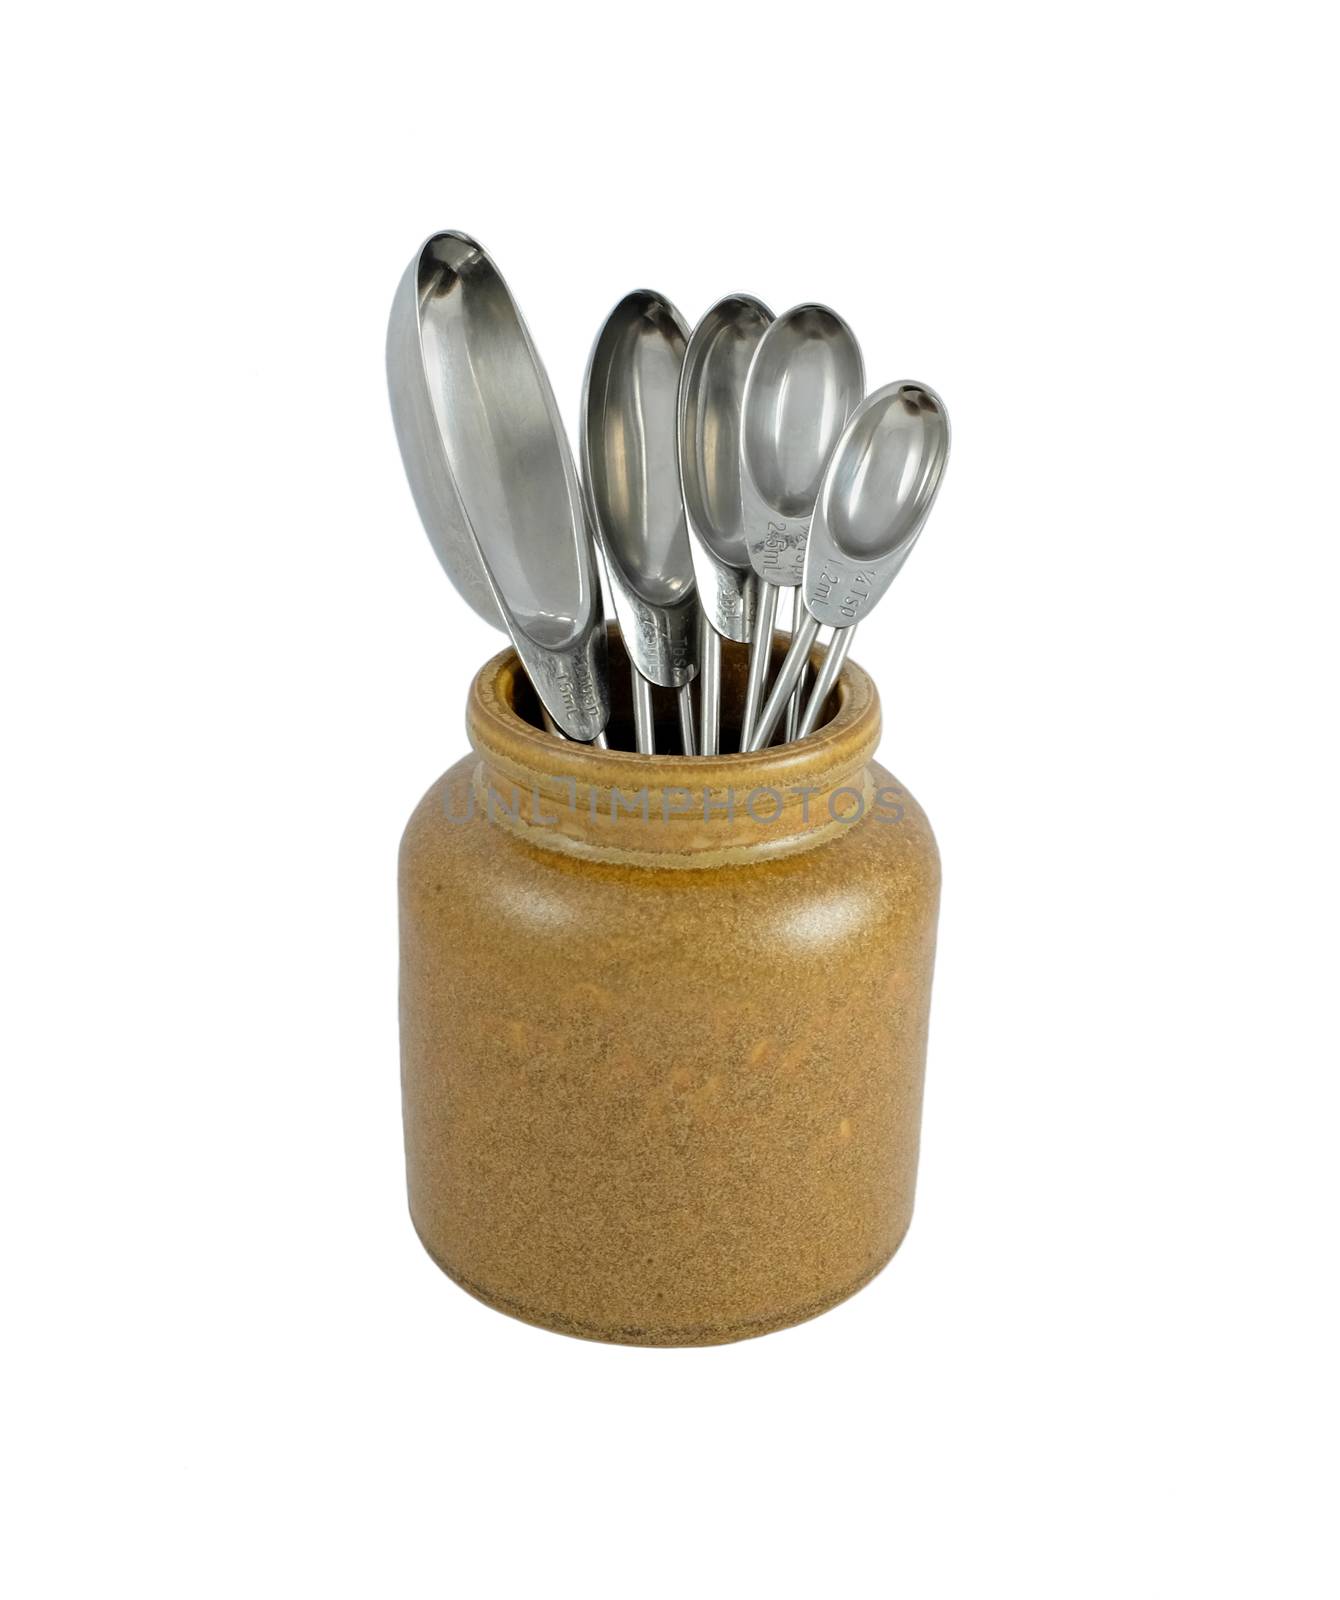 Brown ceramic jar holding metal measuring spoons, isolated on a white background 